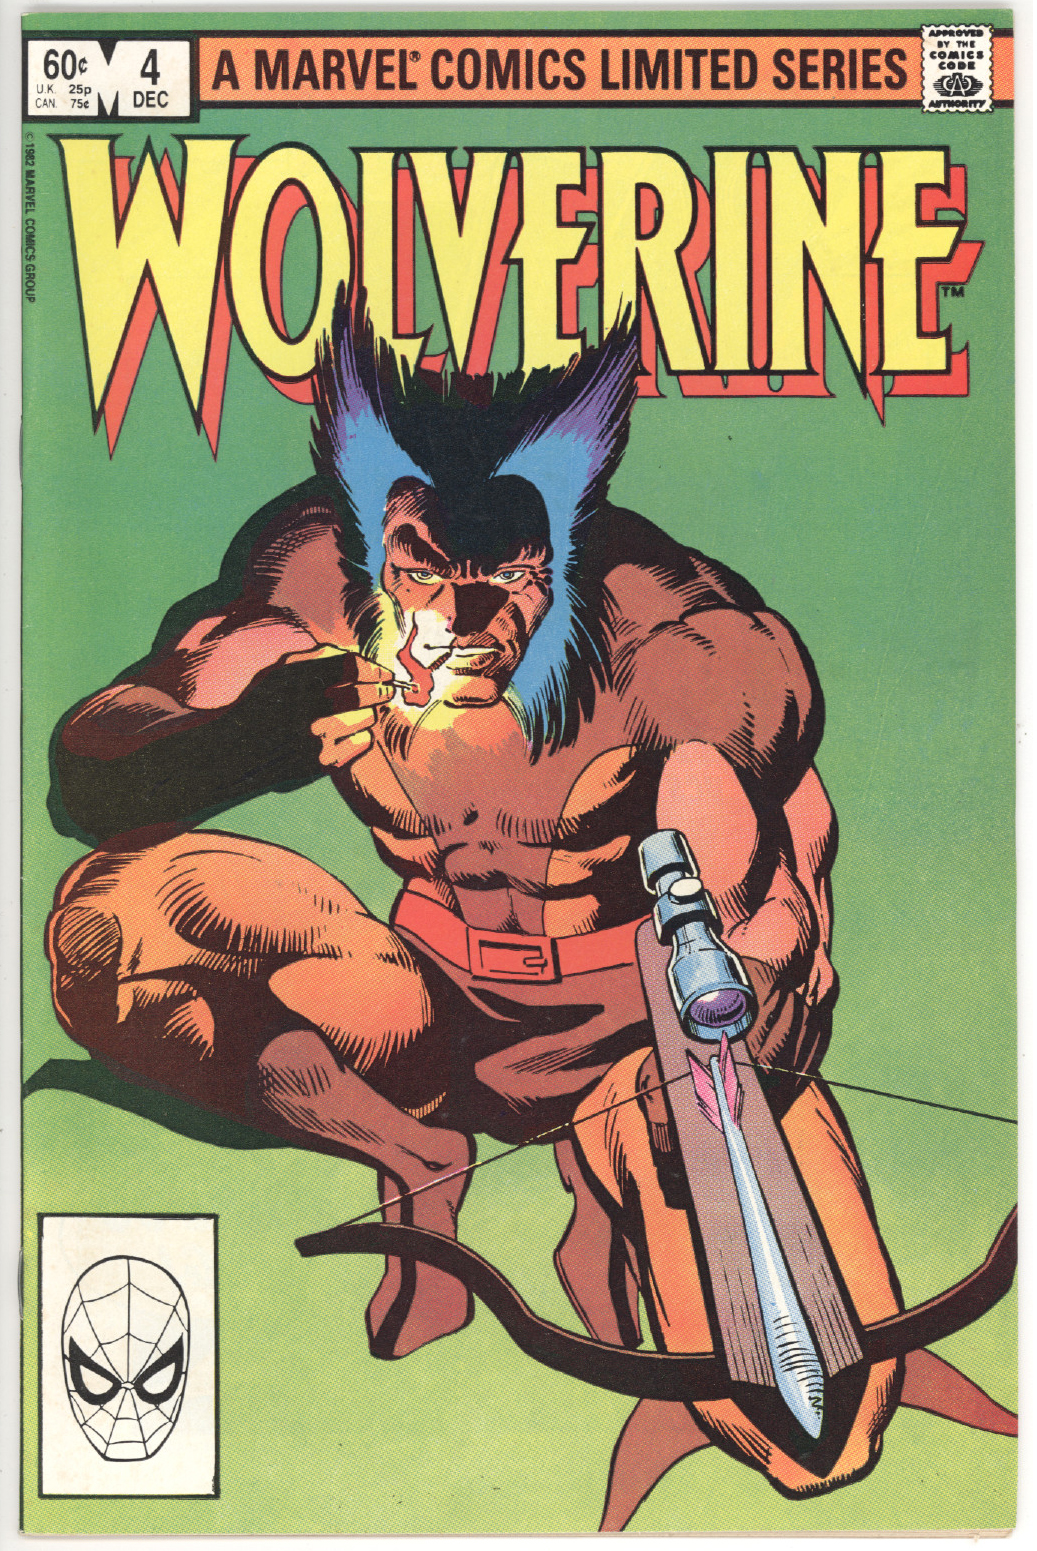 Wolverine Limited Series #4 front